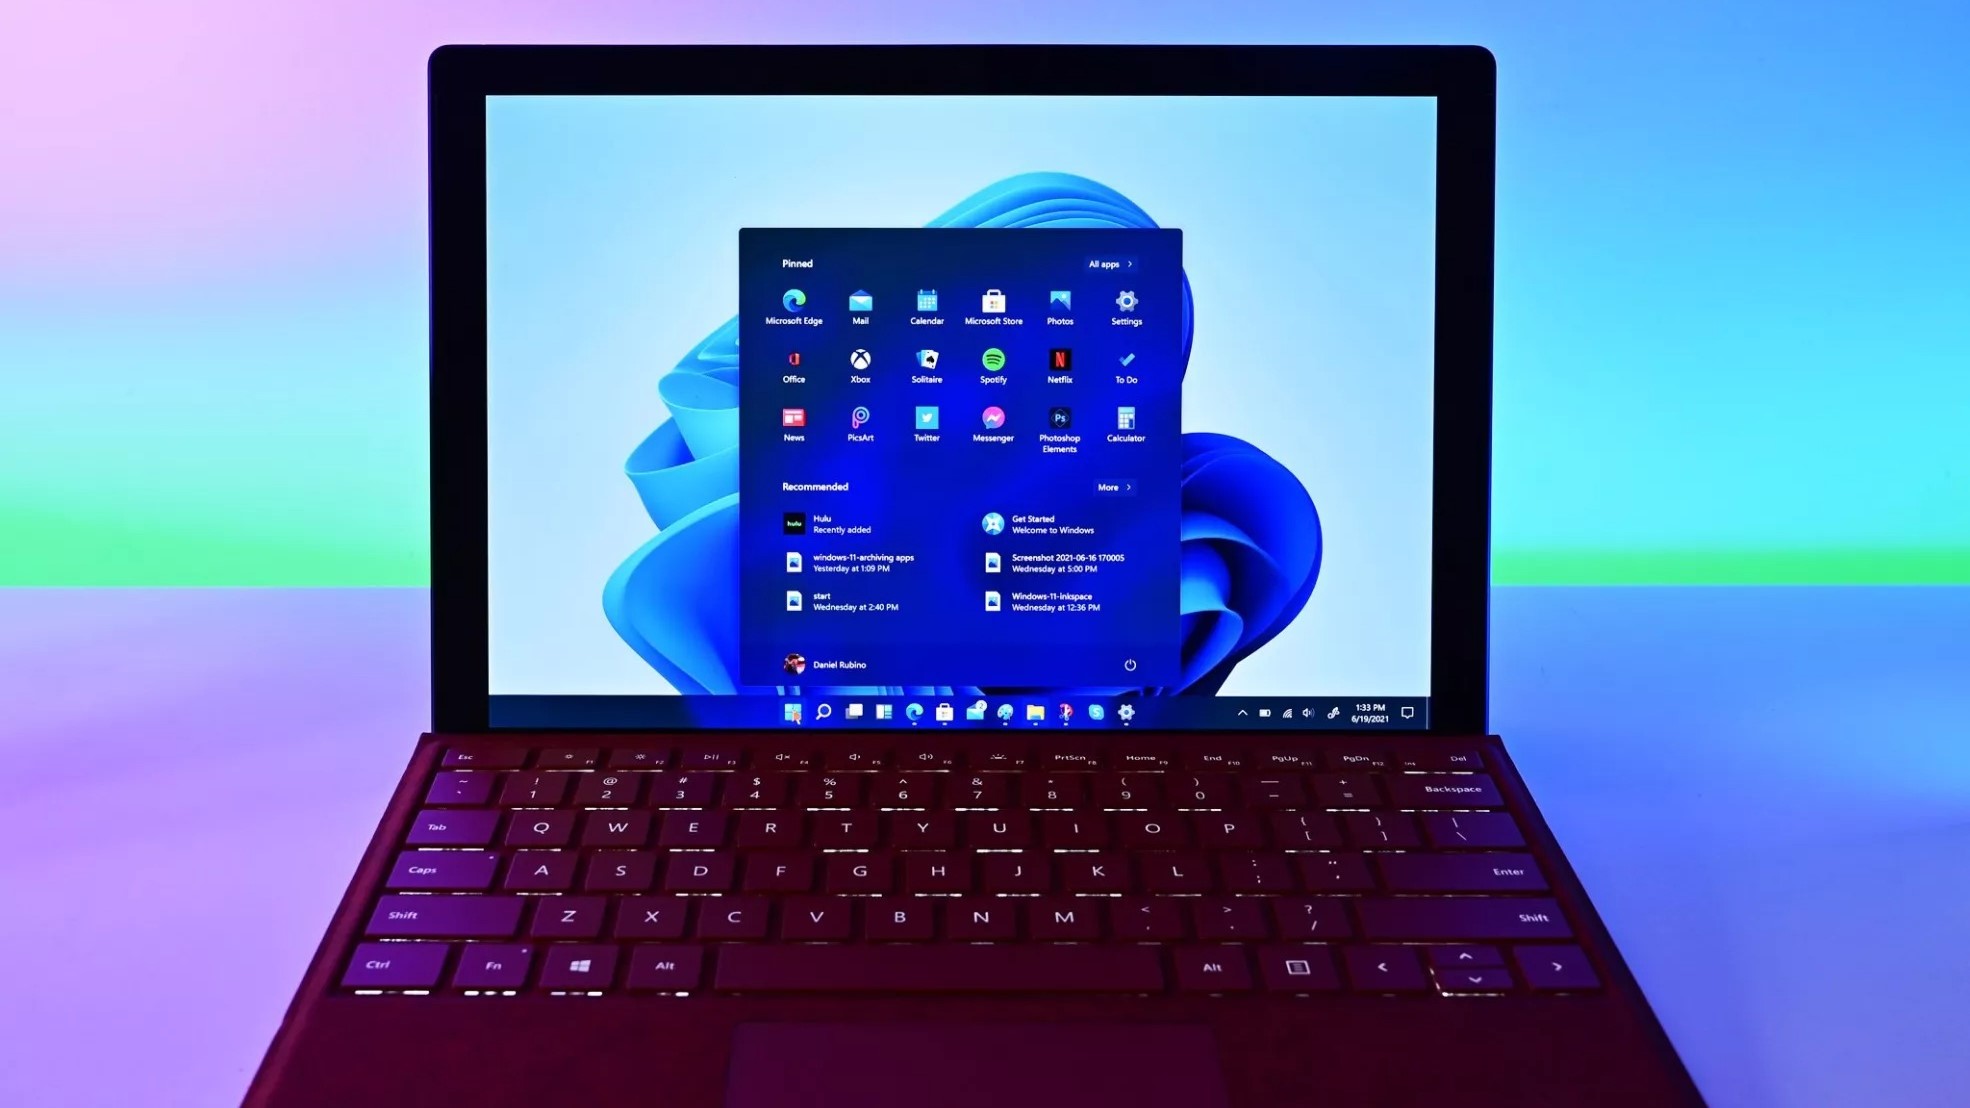 A new security update for Windows 11 is riddling some users with vague BSOD errors, slow boot times, and dismal system performance